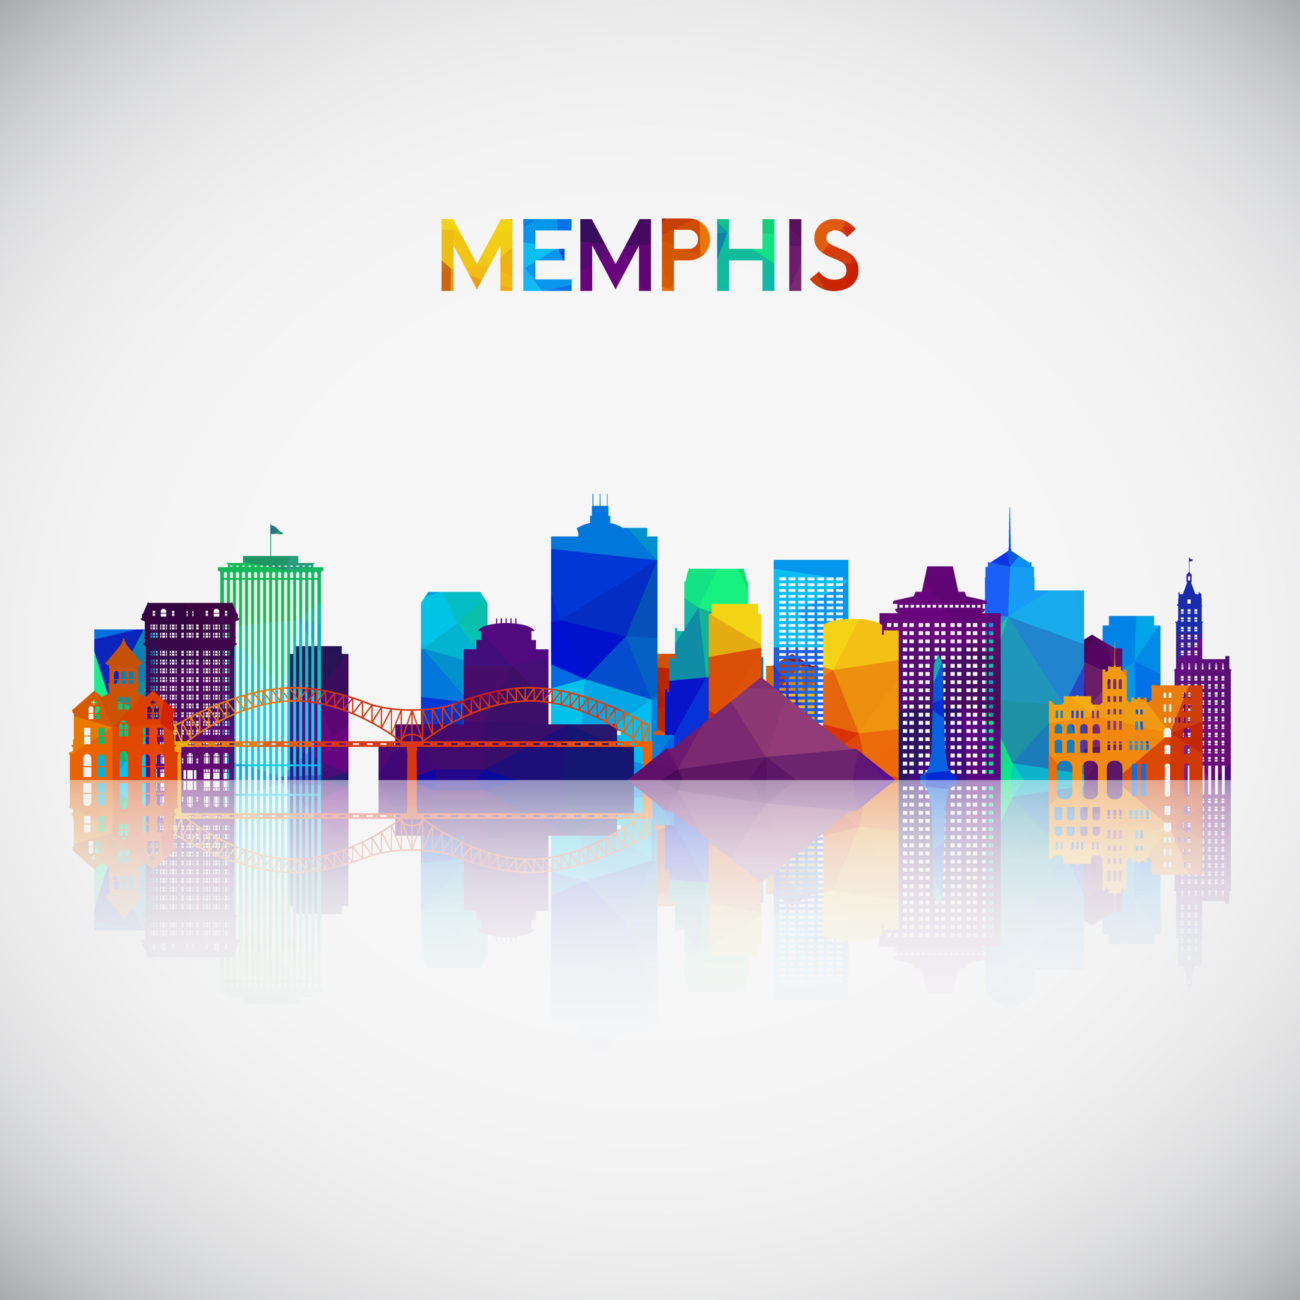 Memphis culture: big city amenities with a small-town feel